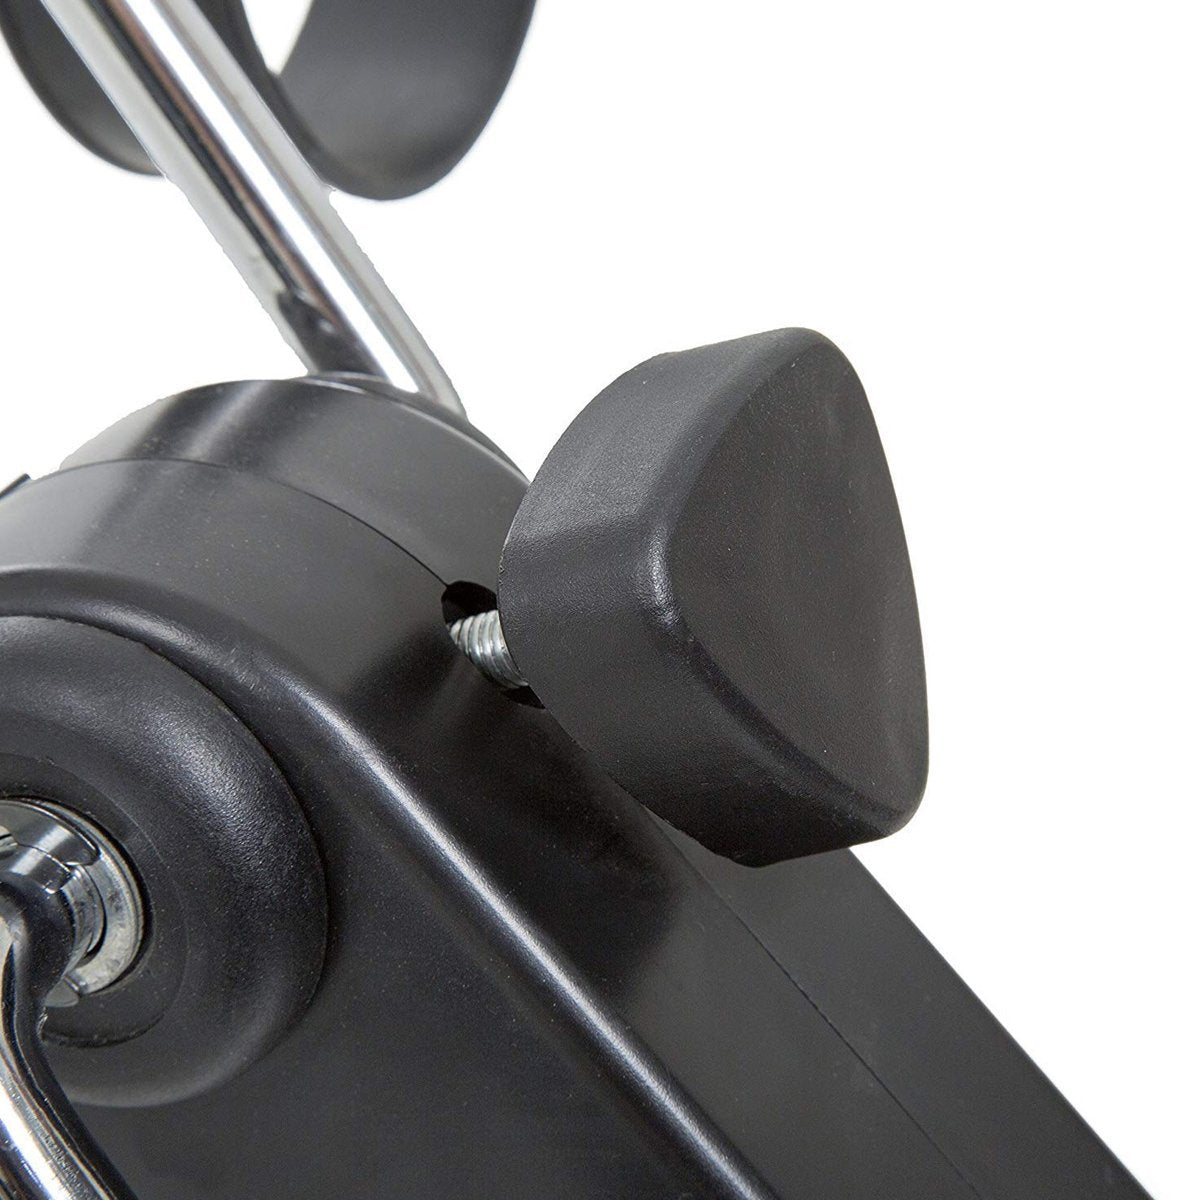 279 mini pedal exercise cycle fitness bike